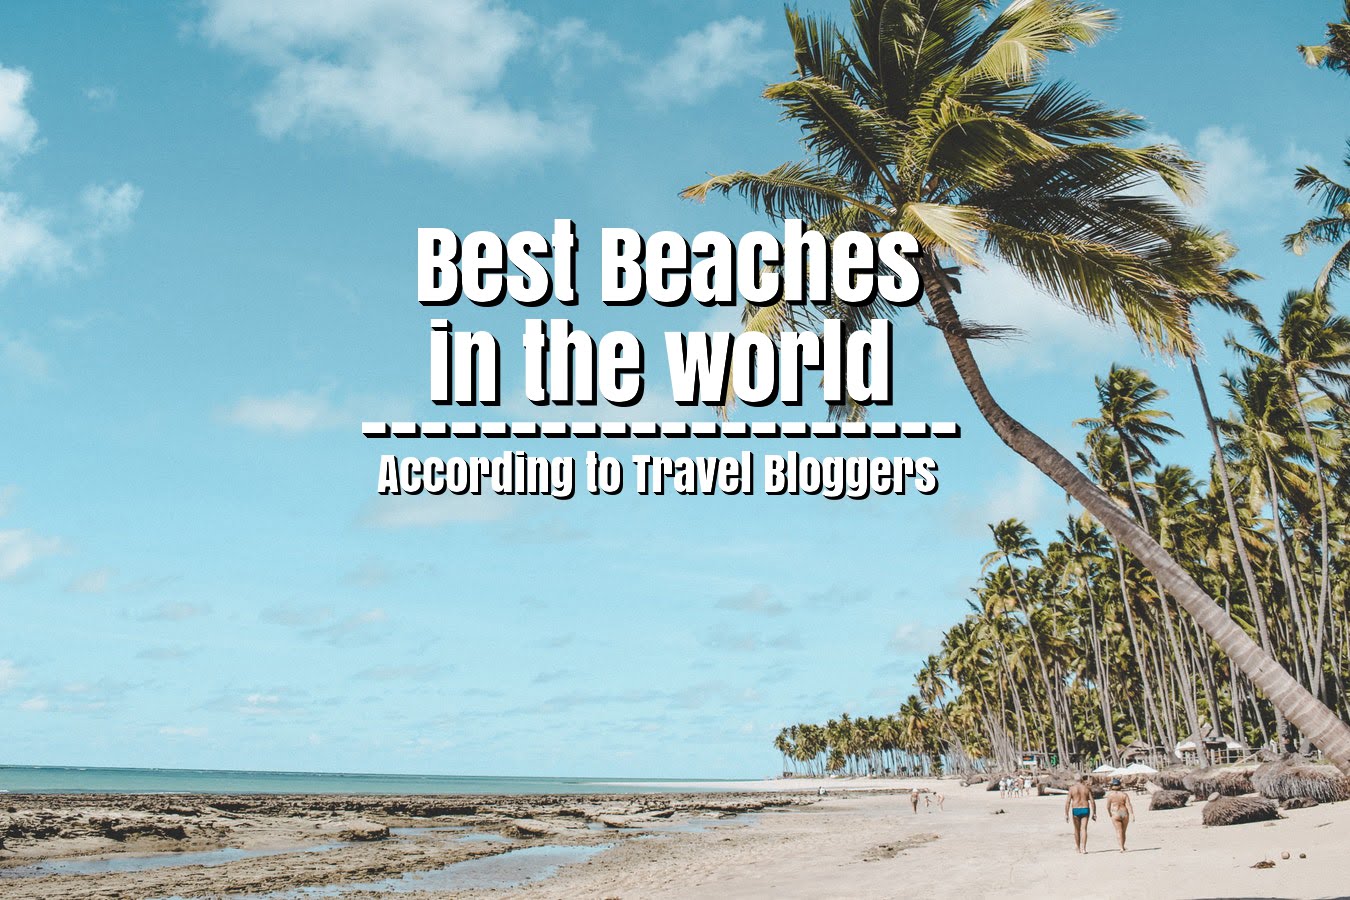 Best Beaches in the World According to Travel Bloggers | Page 6